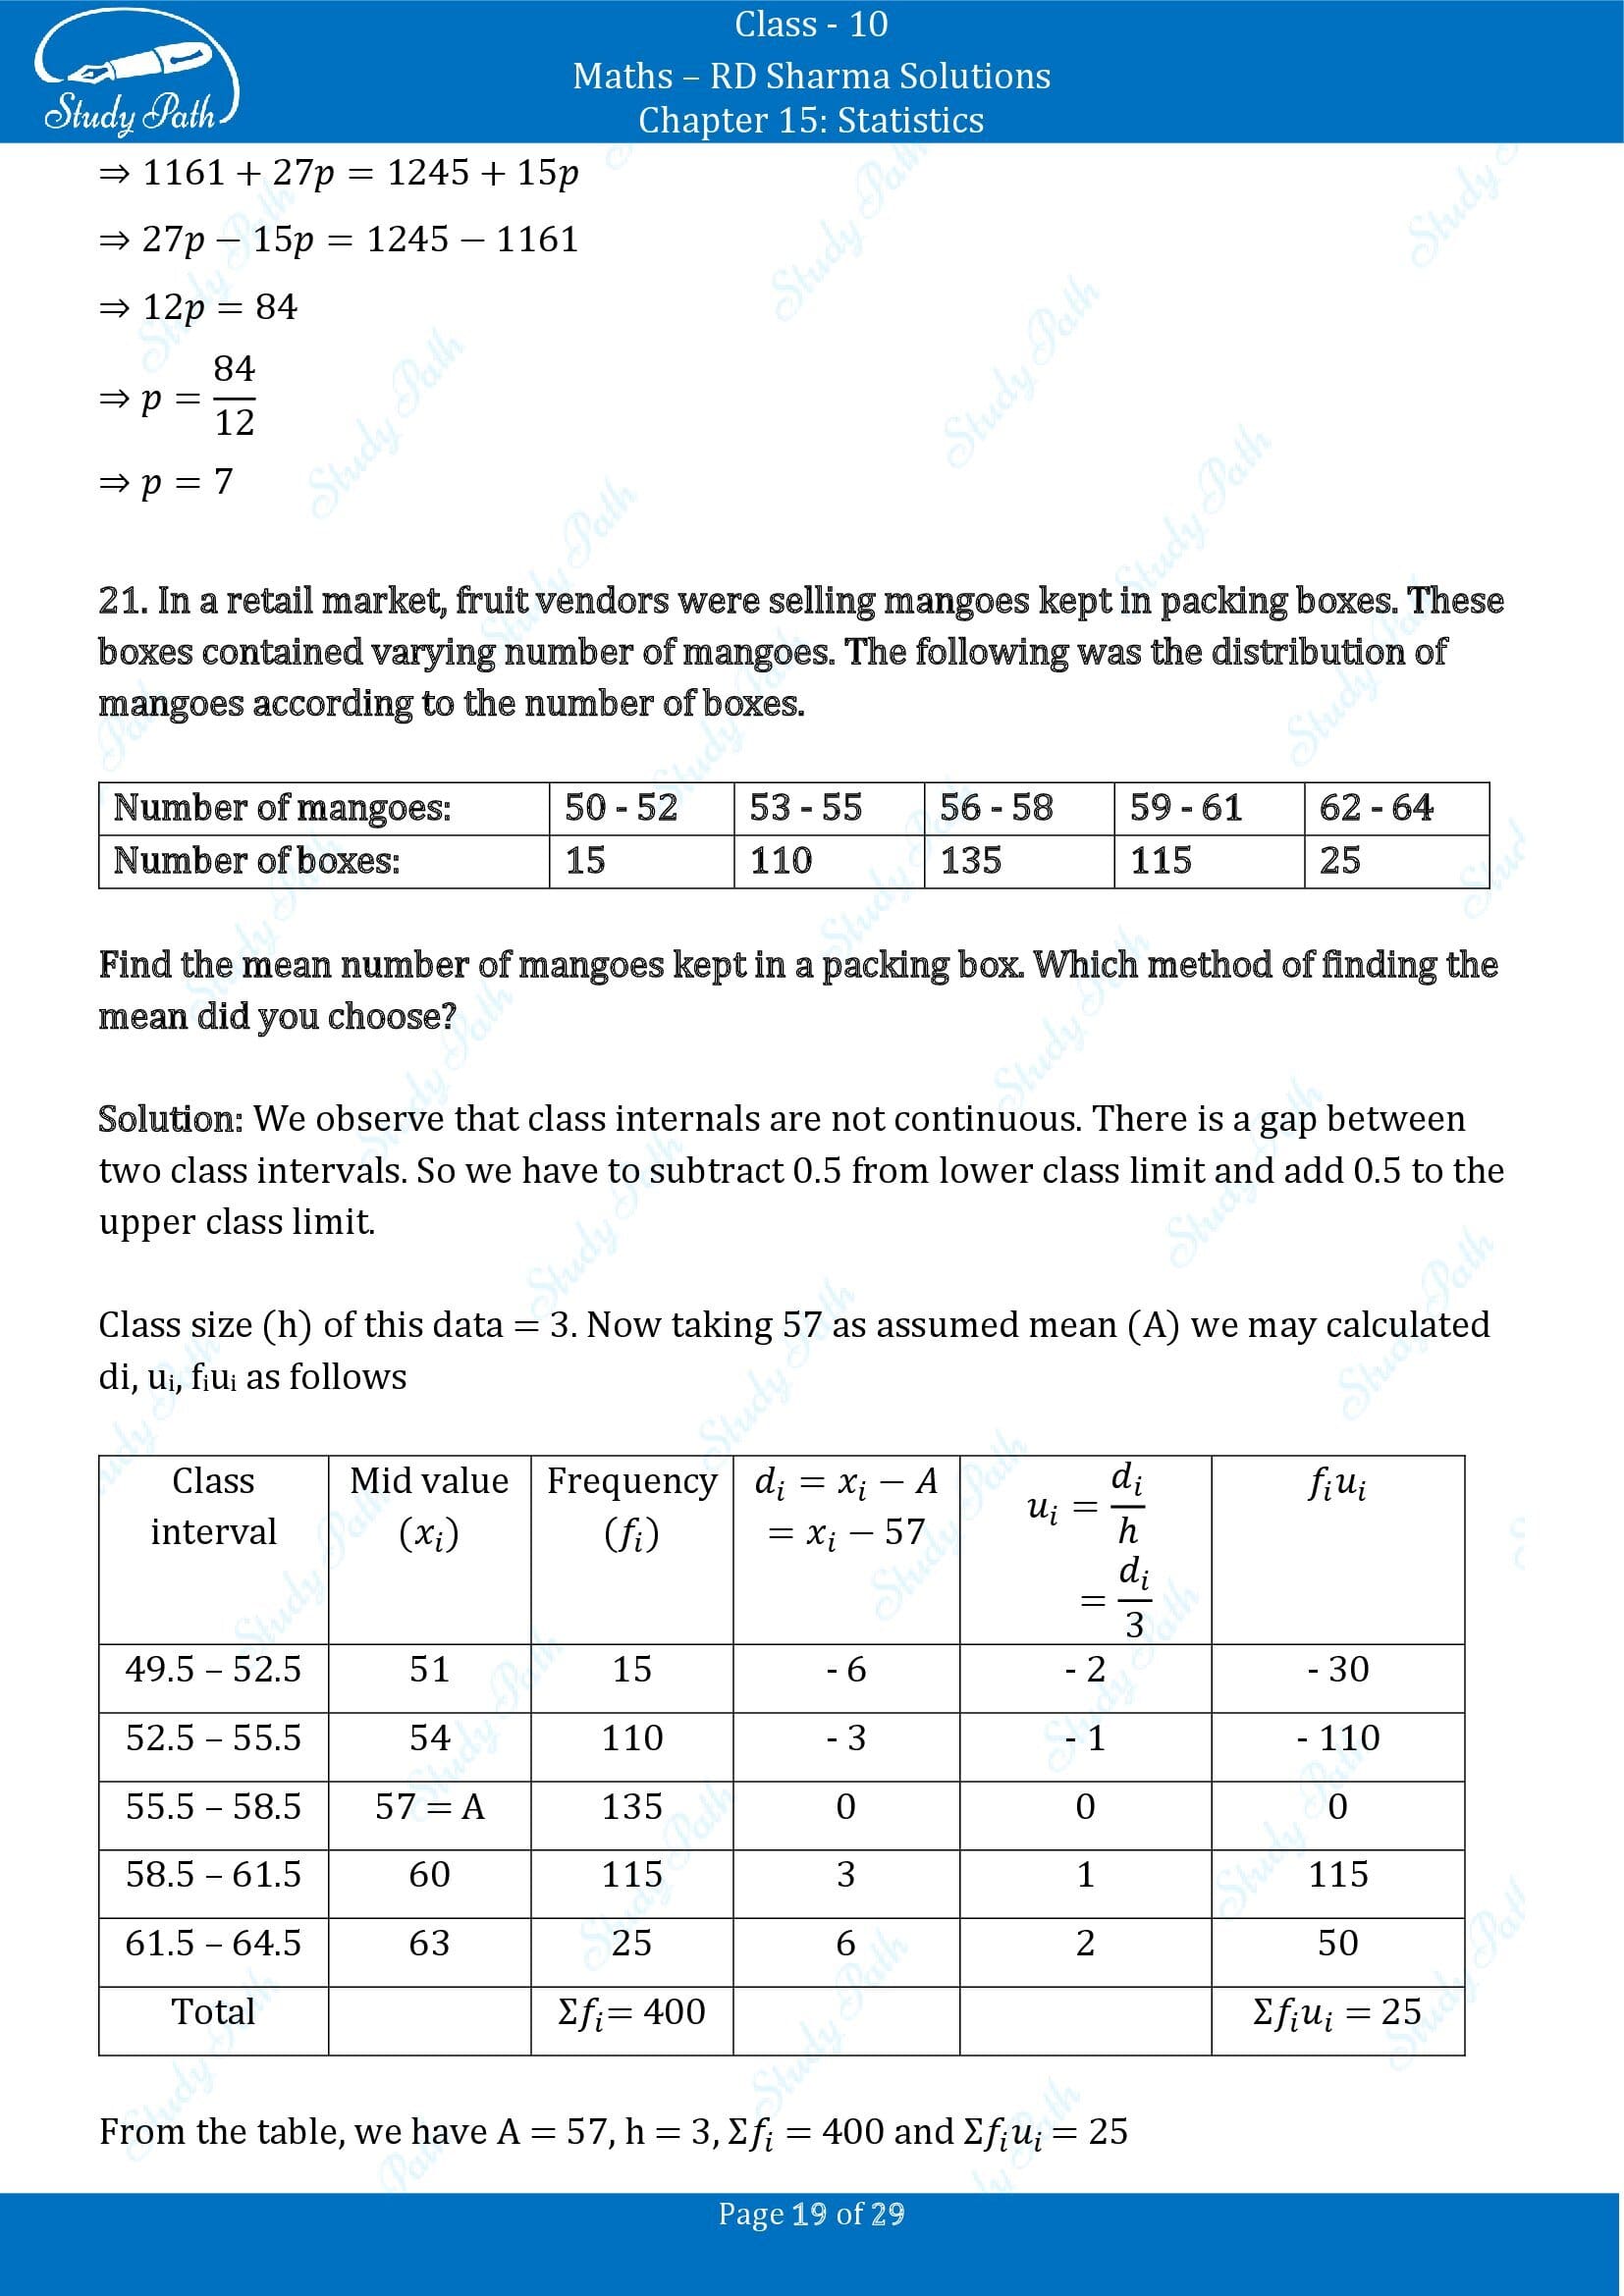 RD Sharma Solutions Class 10 Chapter 15 Statistics Exercise 15.3 0019